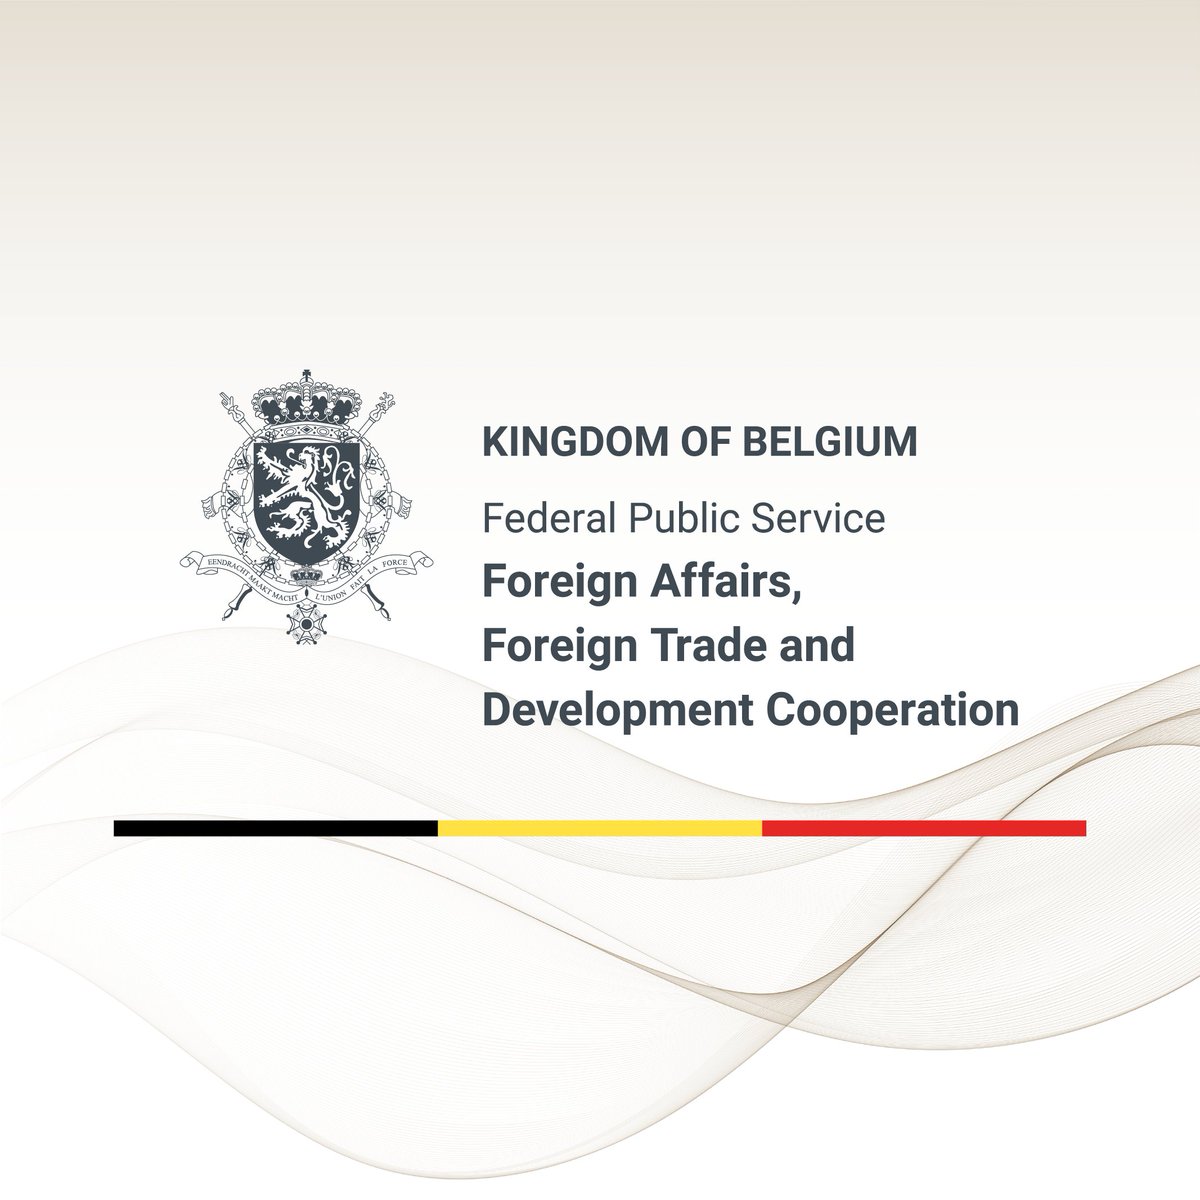 🇧🇪 Foreign Affairs welcomes legal amendment allowing foreign partners of diplomats to obtain the Belgian nationality. ℹ️ Read more in our press release: diplomatie.belgium.be/en/news/foreig…